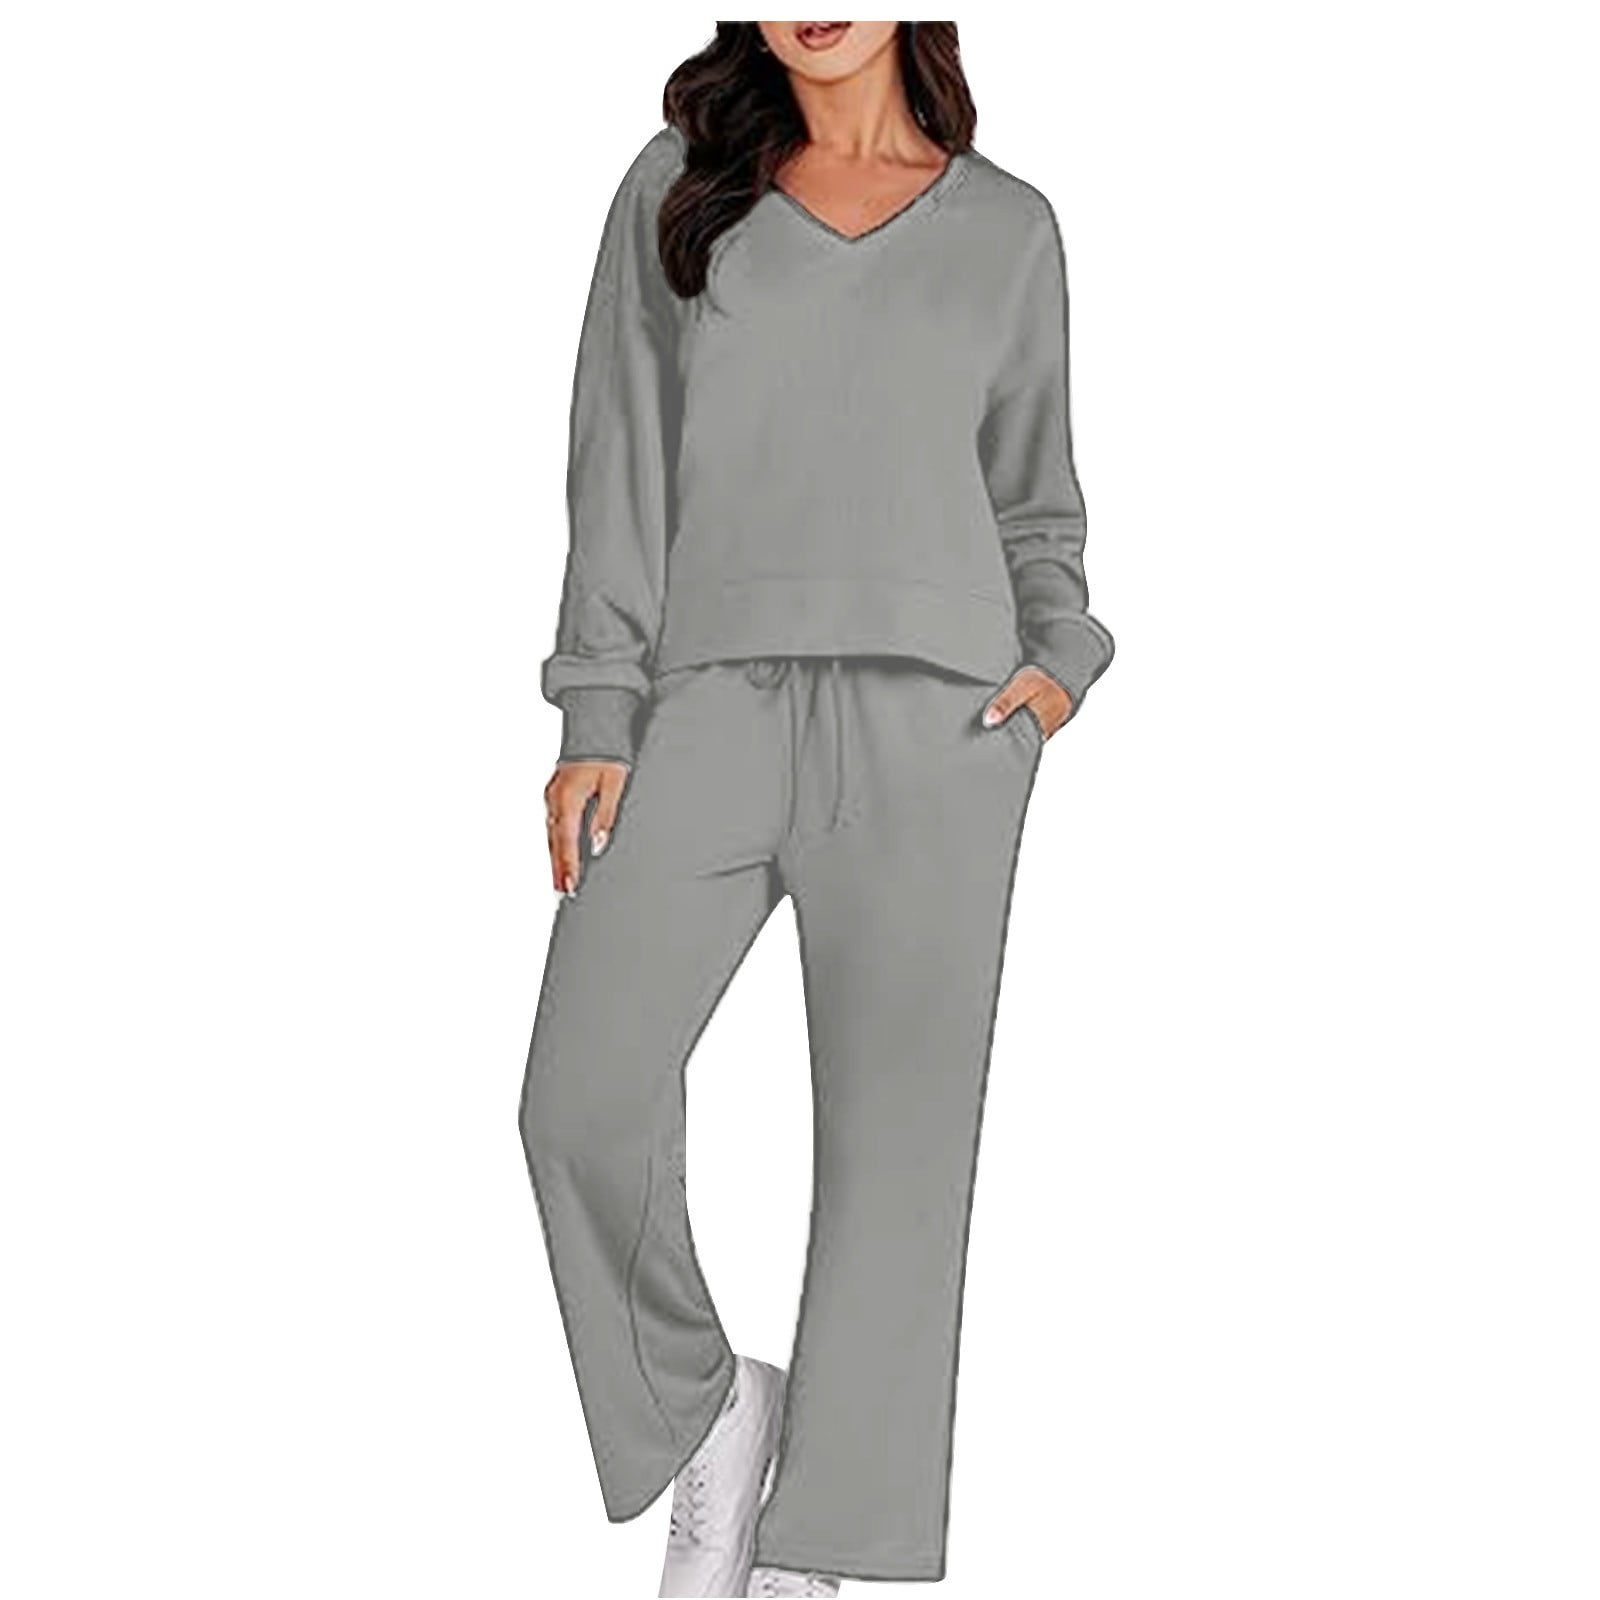 ZQGJB Women's 2 Piece Lounge Sets Sweatsuit Outfits Long Sleeve Casual ...